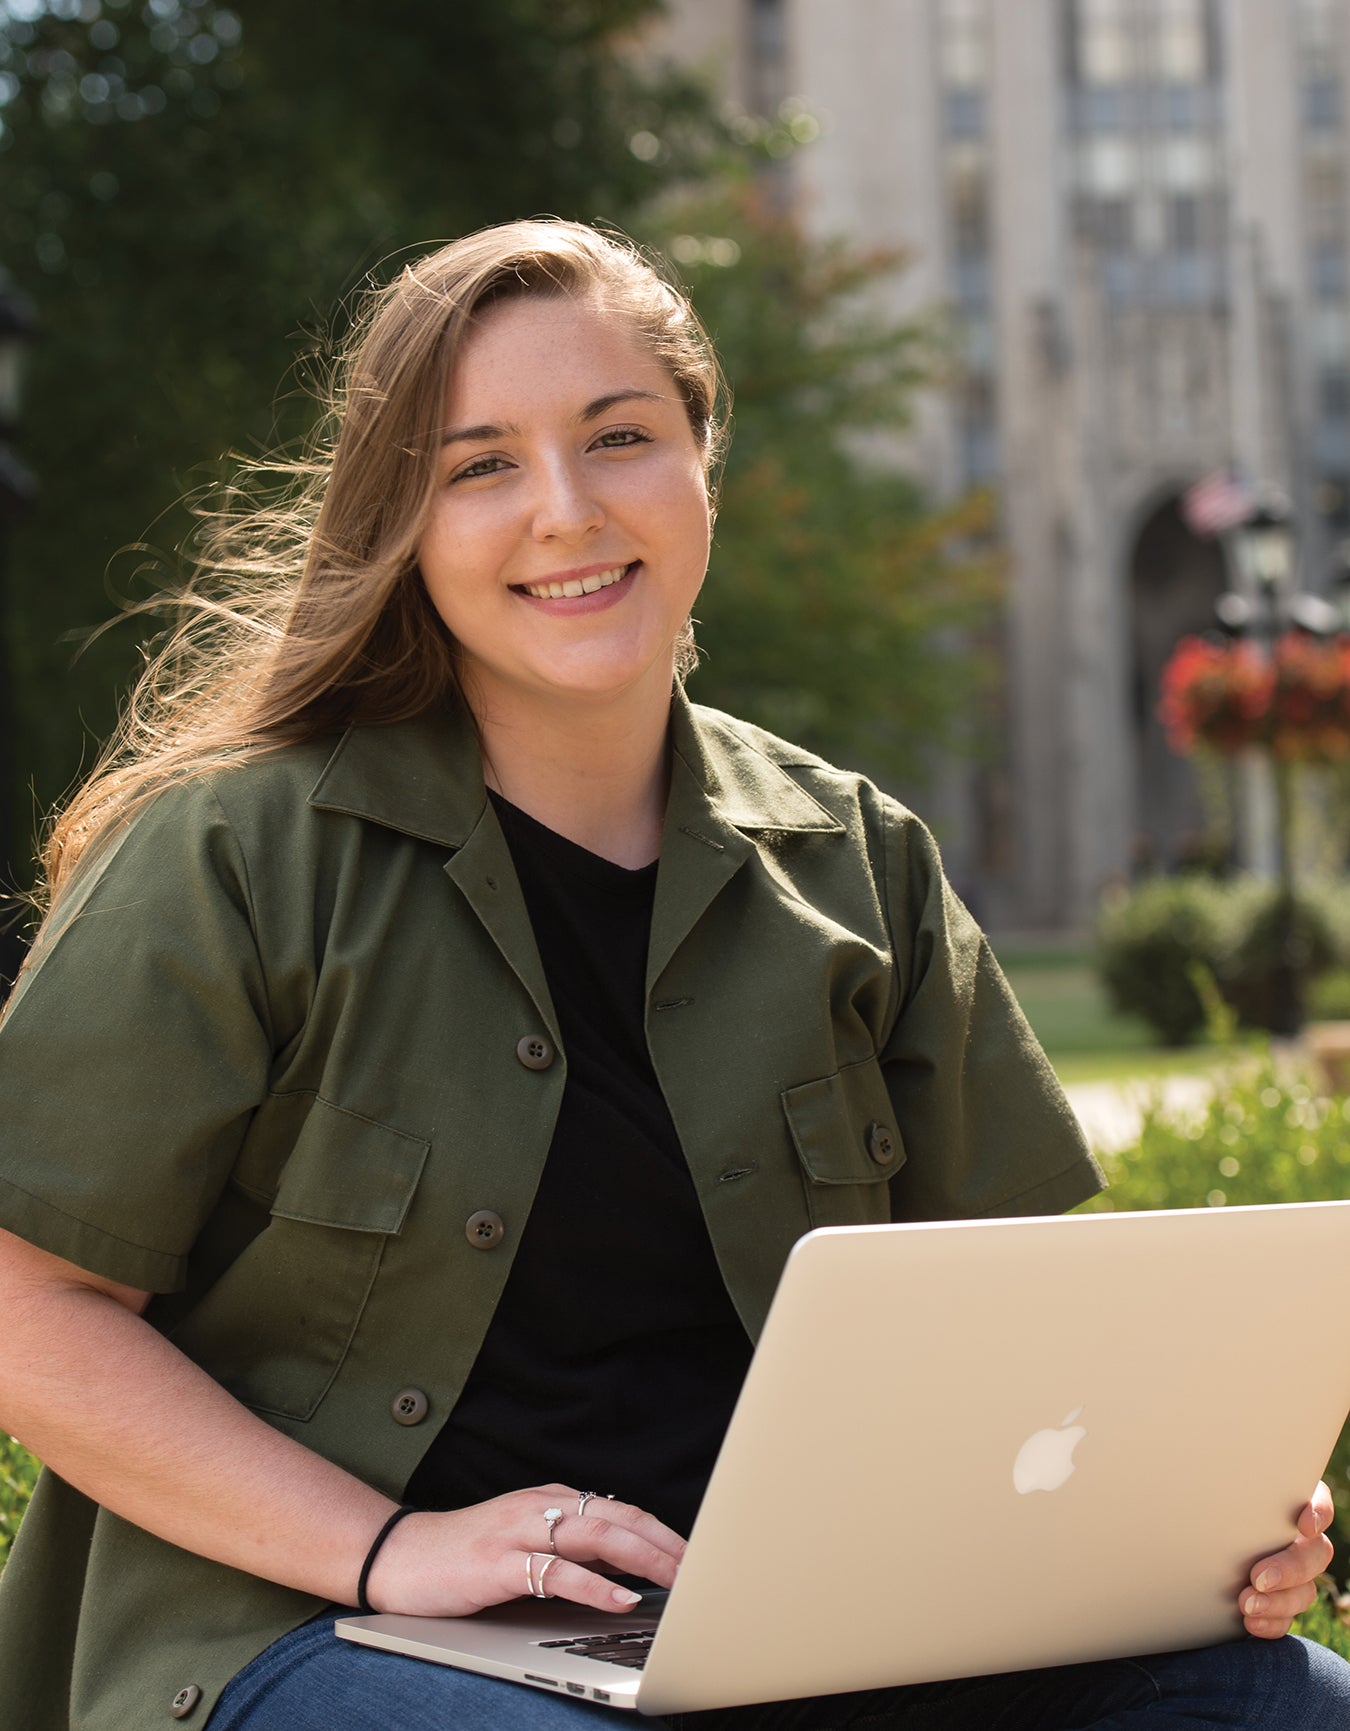 Michelle Ruoff on Pitt's campus with her computer